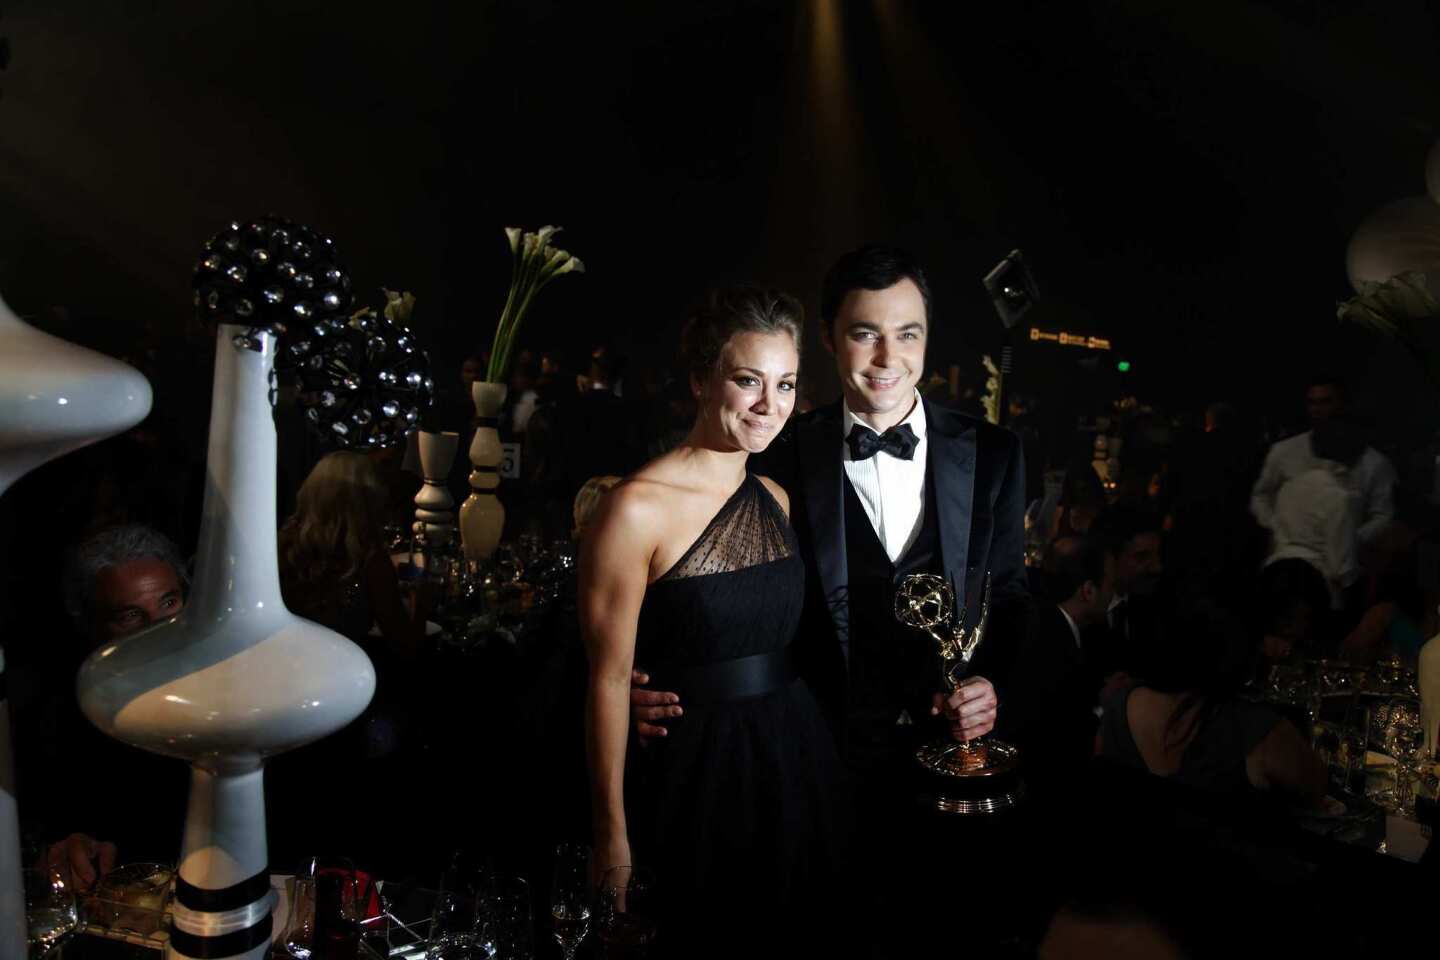 Jim Parsons and "Big Bang Theory" costar Kaley Cuoco attend the post-Emmys Governors Ball in the West Hall of the Los Angeles Convention Center on Sunday night.